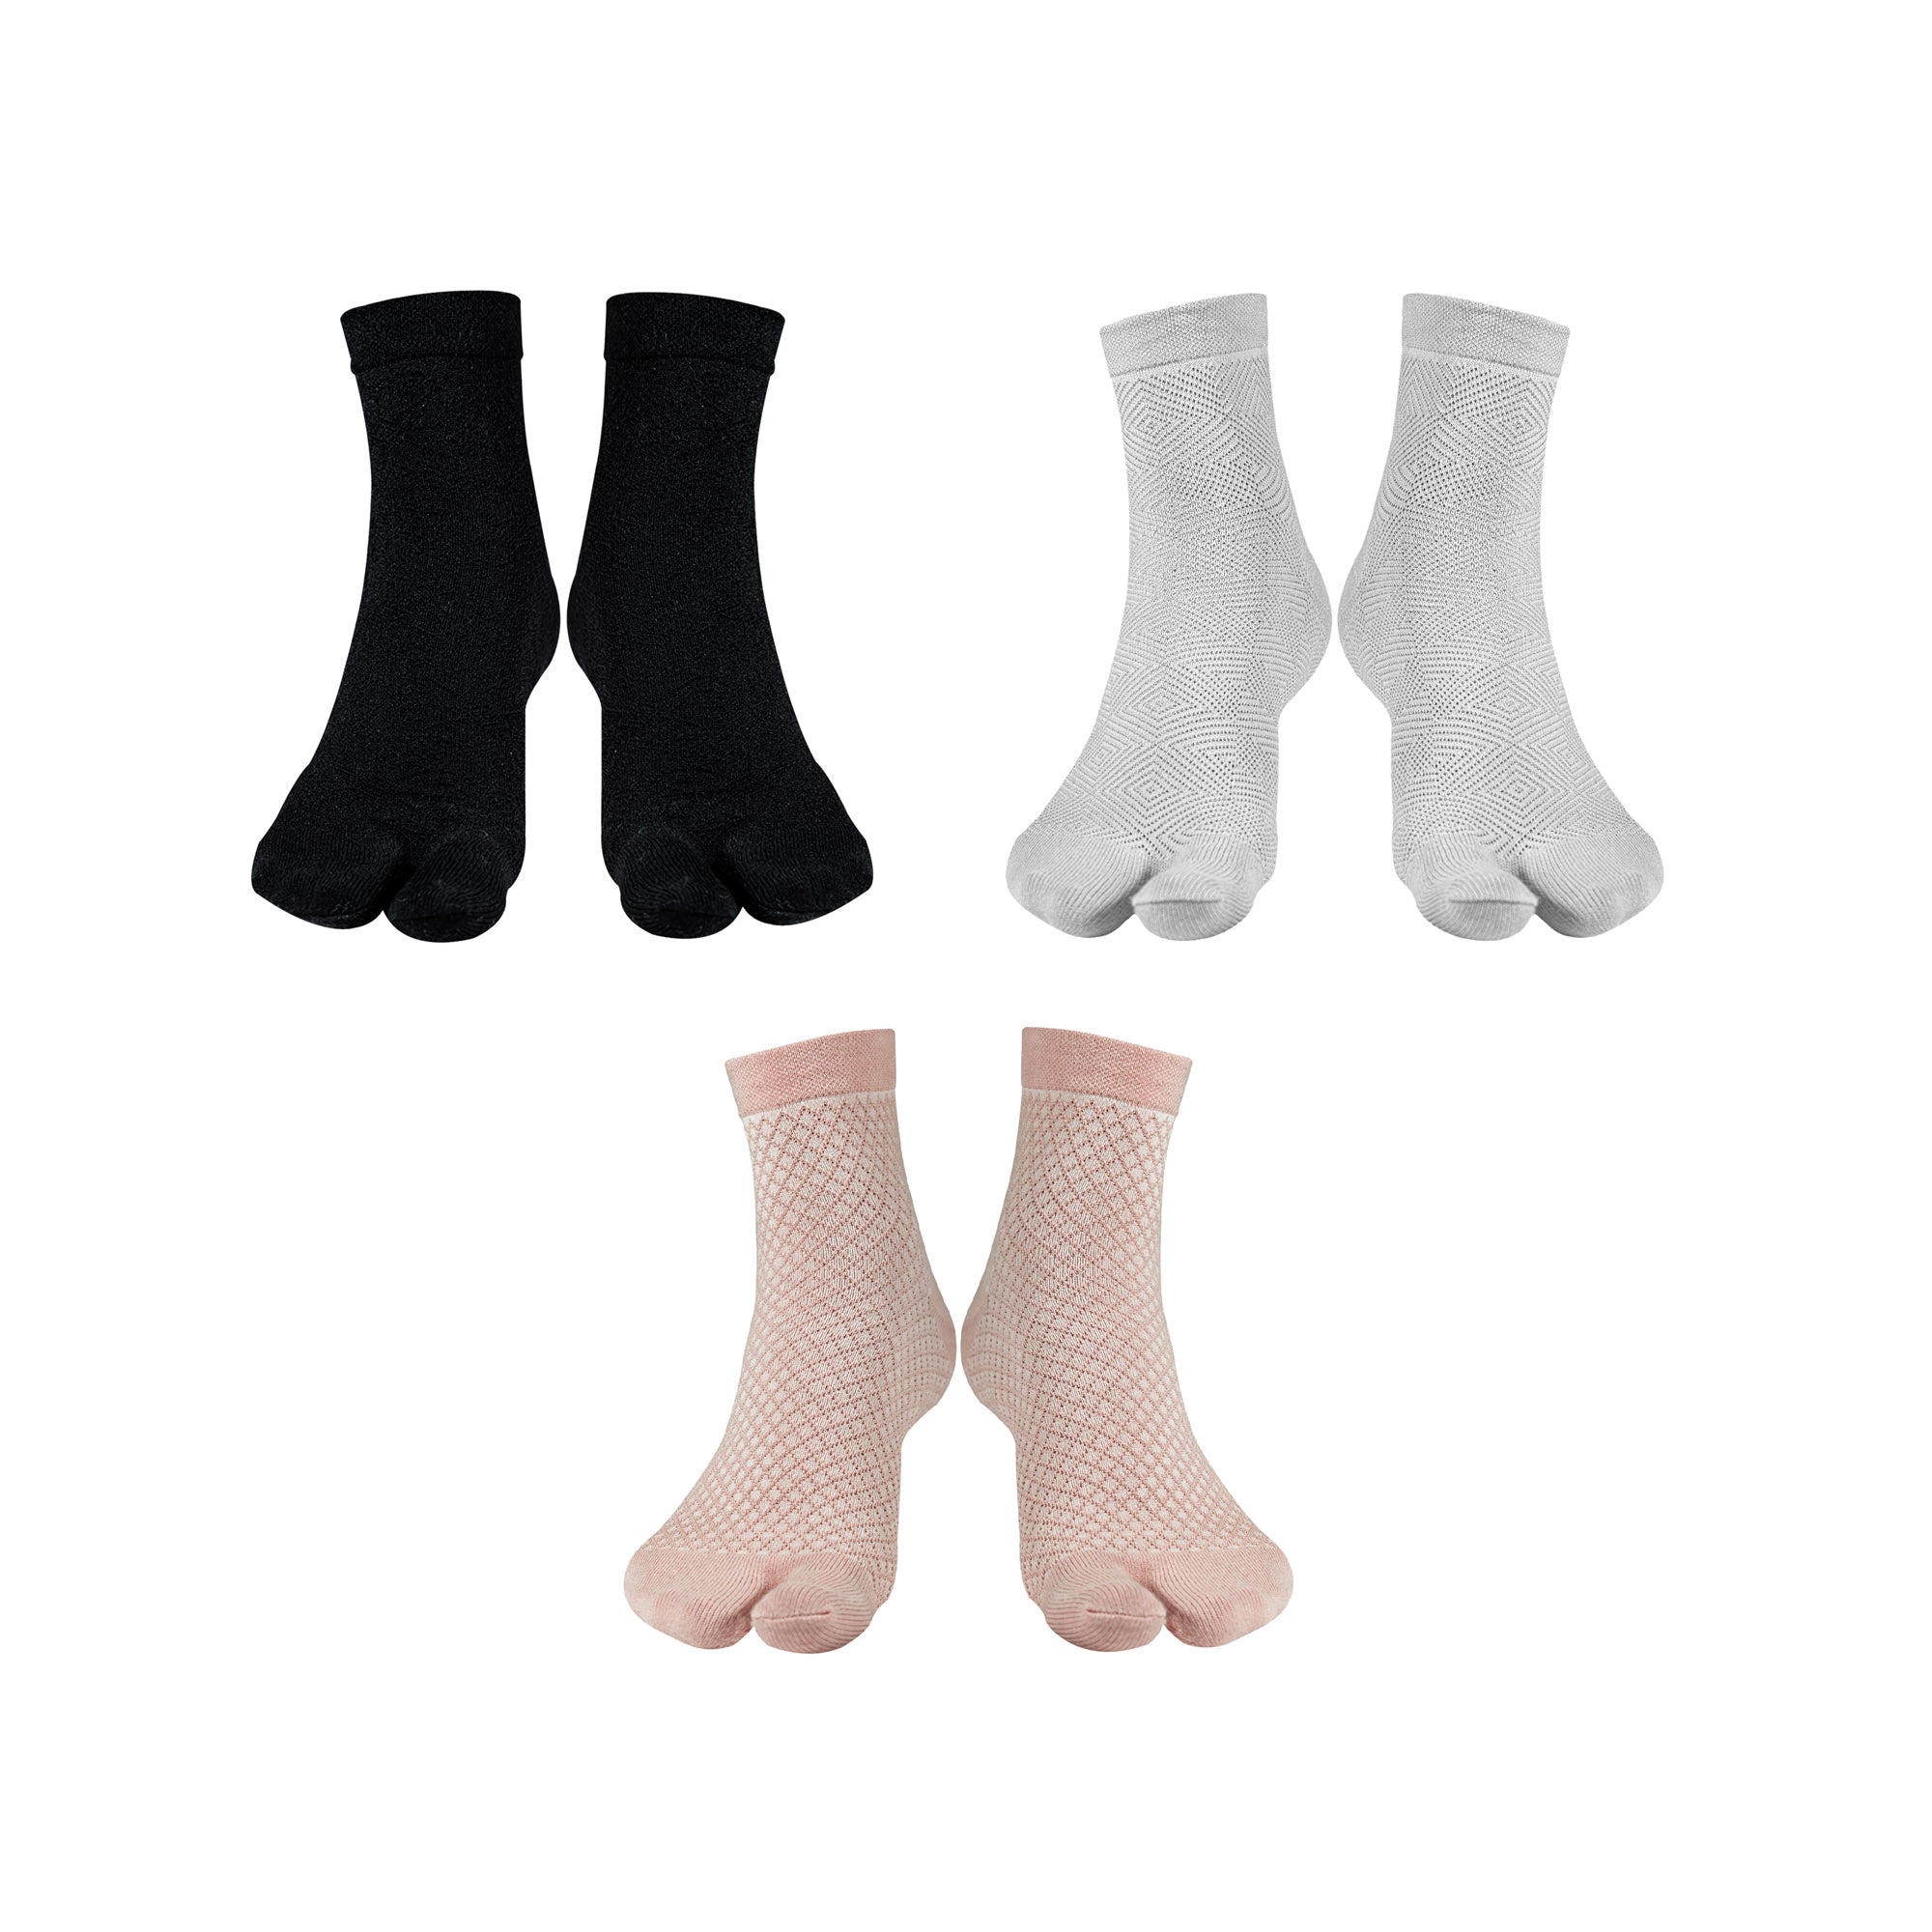 Buy YOUNG WINGS Men's_Socks Multi Colour Cotton Fabric Solid Free Size  Ankle Length Casuals & Formals Wear Socks Pack Of 5_2200-M1 at